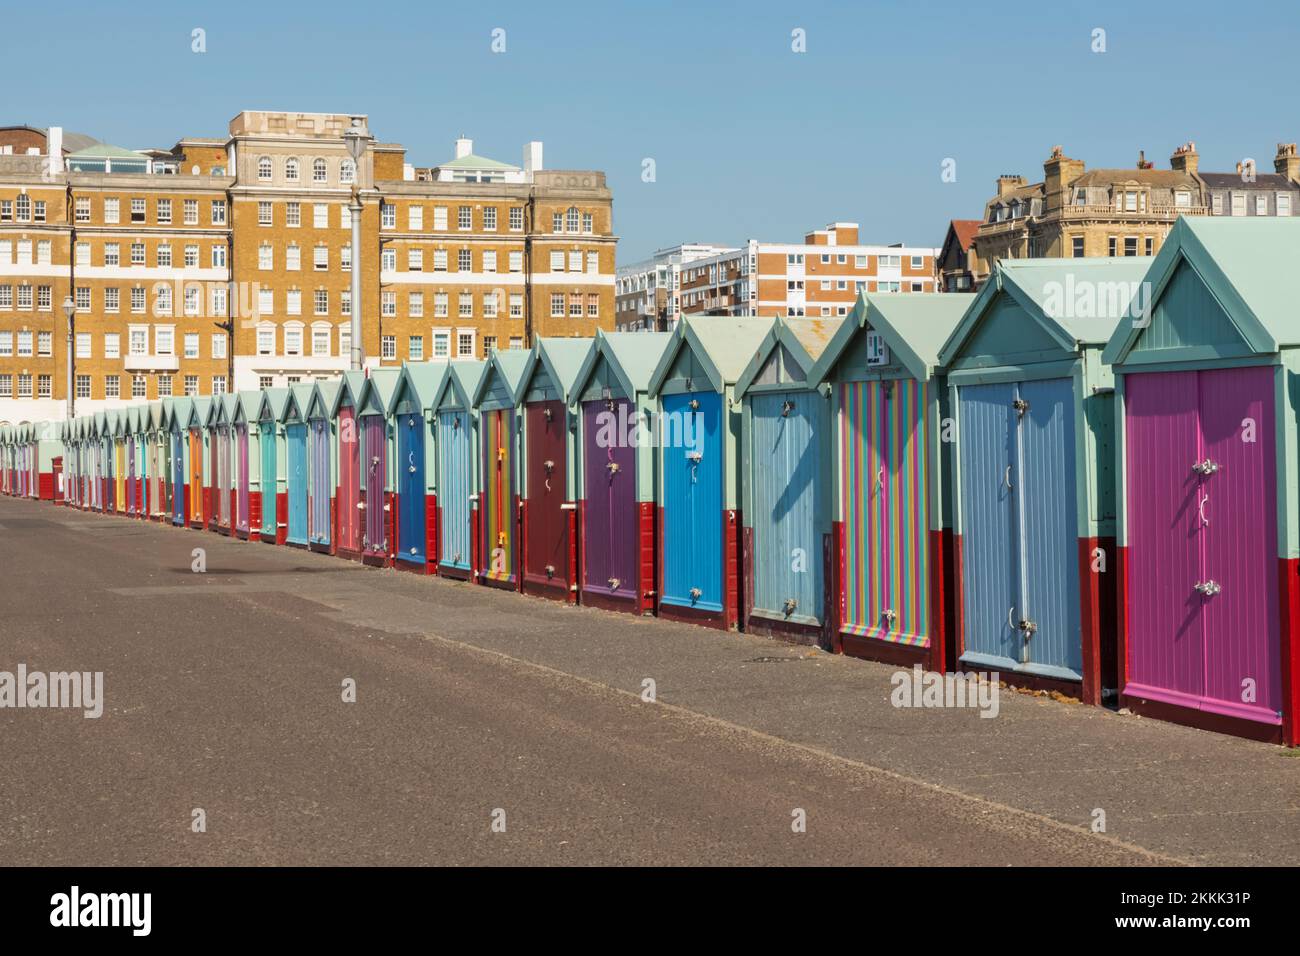 England, East Sussex, Brighton, Hove, Row of Colourful Beach Huts Stockfoto